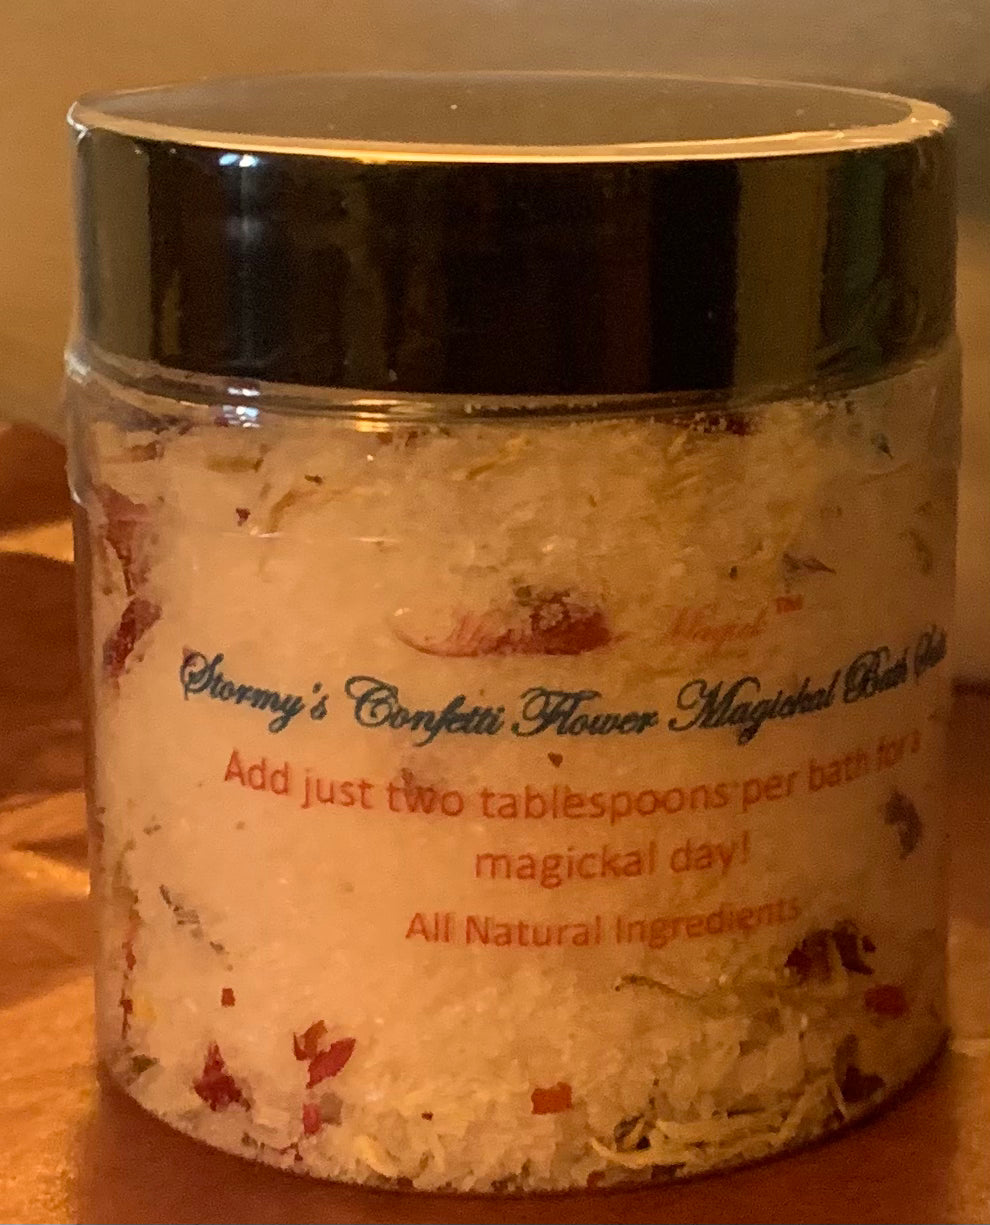 Stormy’s Magickal Bath Salts for an Energetic & Lucky Day!